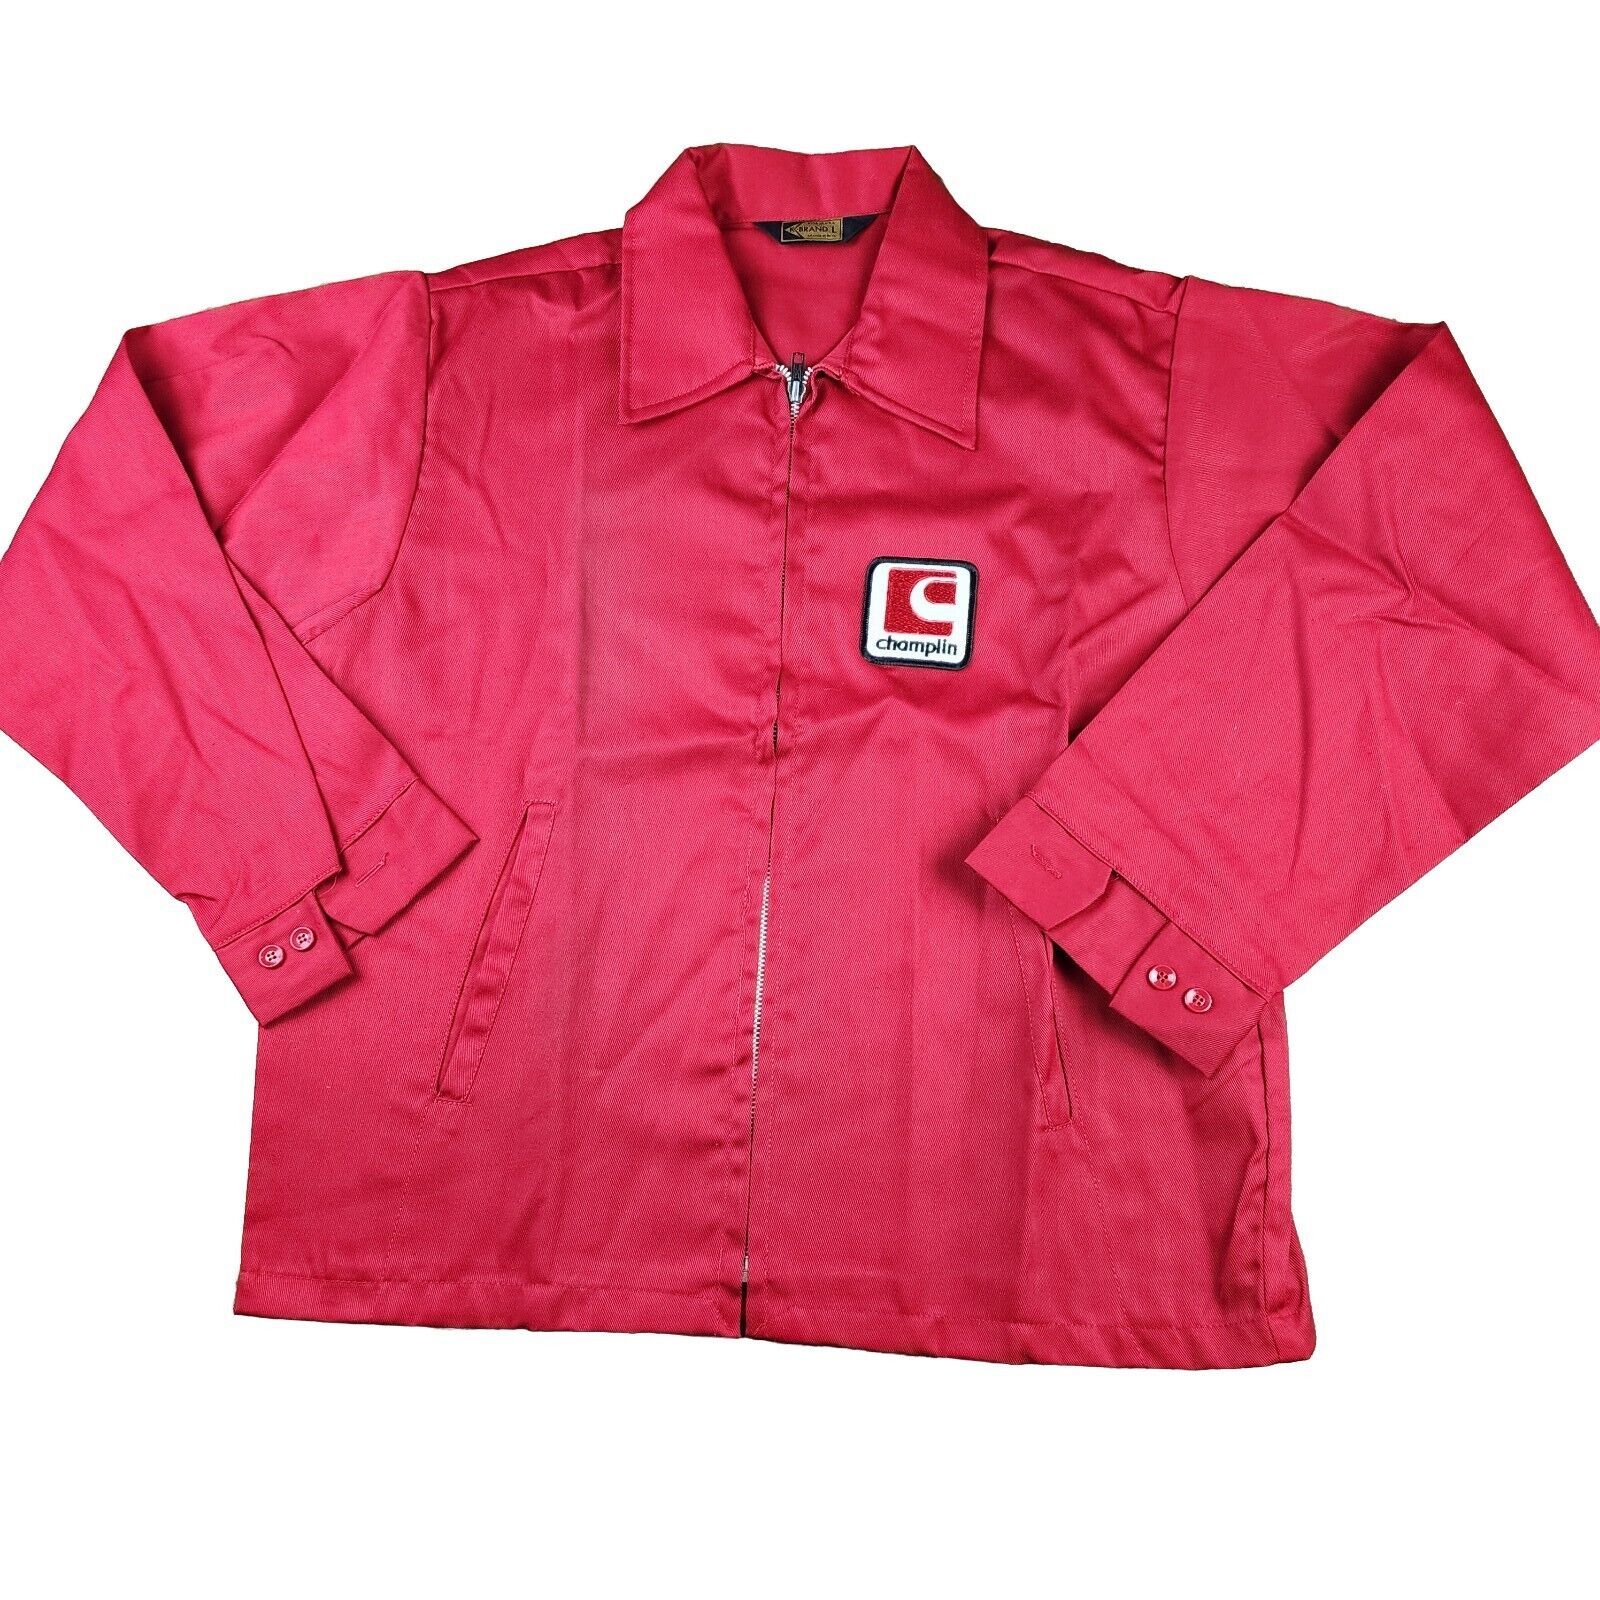 Champlin Oil Refinery Work Shirt Large Original New Never Washed Vintage Red 